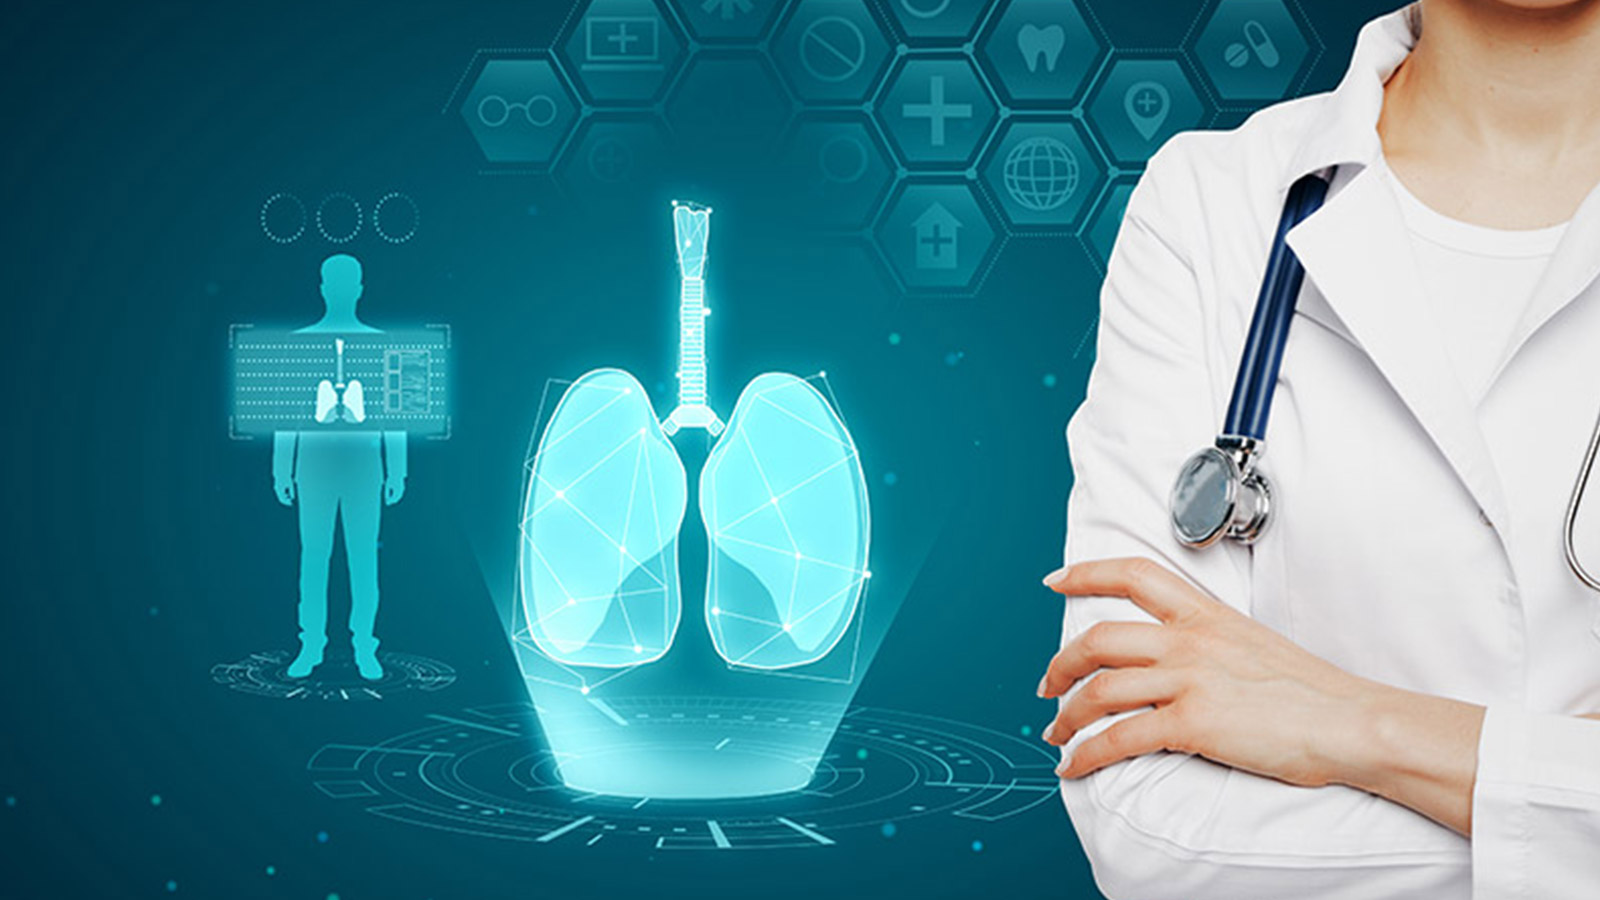 Pulmonology is the area of medicine that focuses on the respiratory system’s health. Pulmonologists are medical specialists that diagnose and treat conditions affecting the respiratory system.